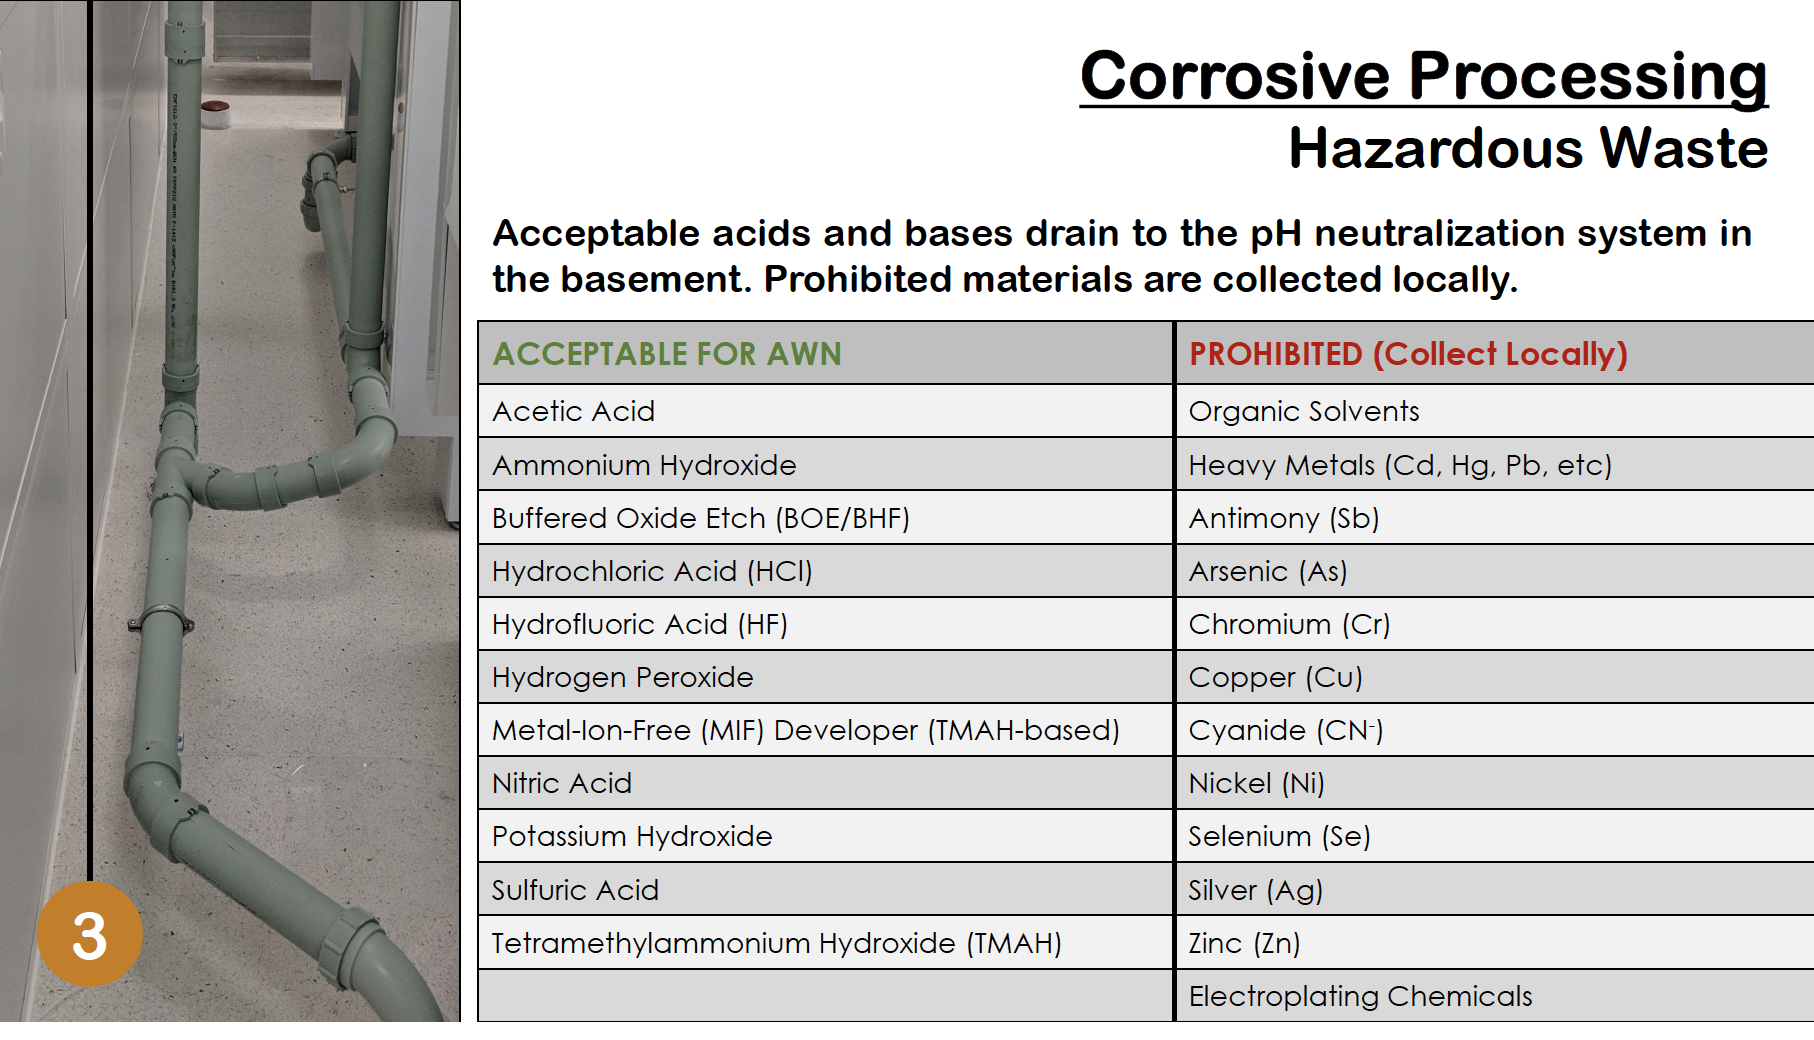 A chart displaying corrosive processing hazardous waste processes.